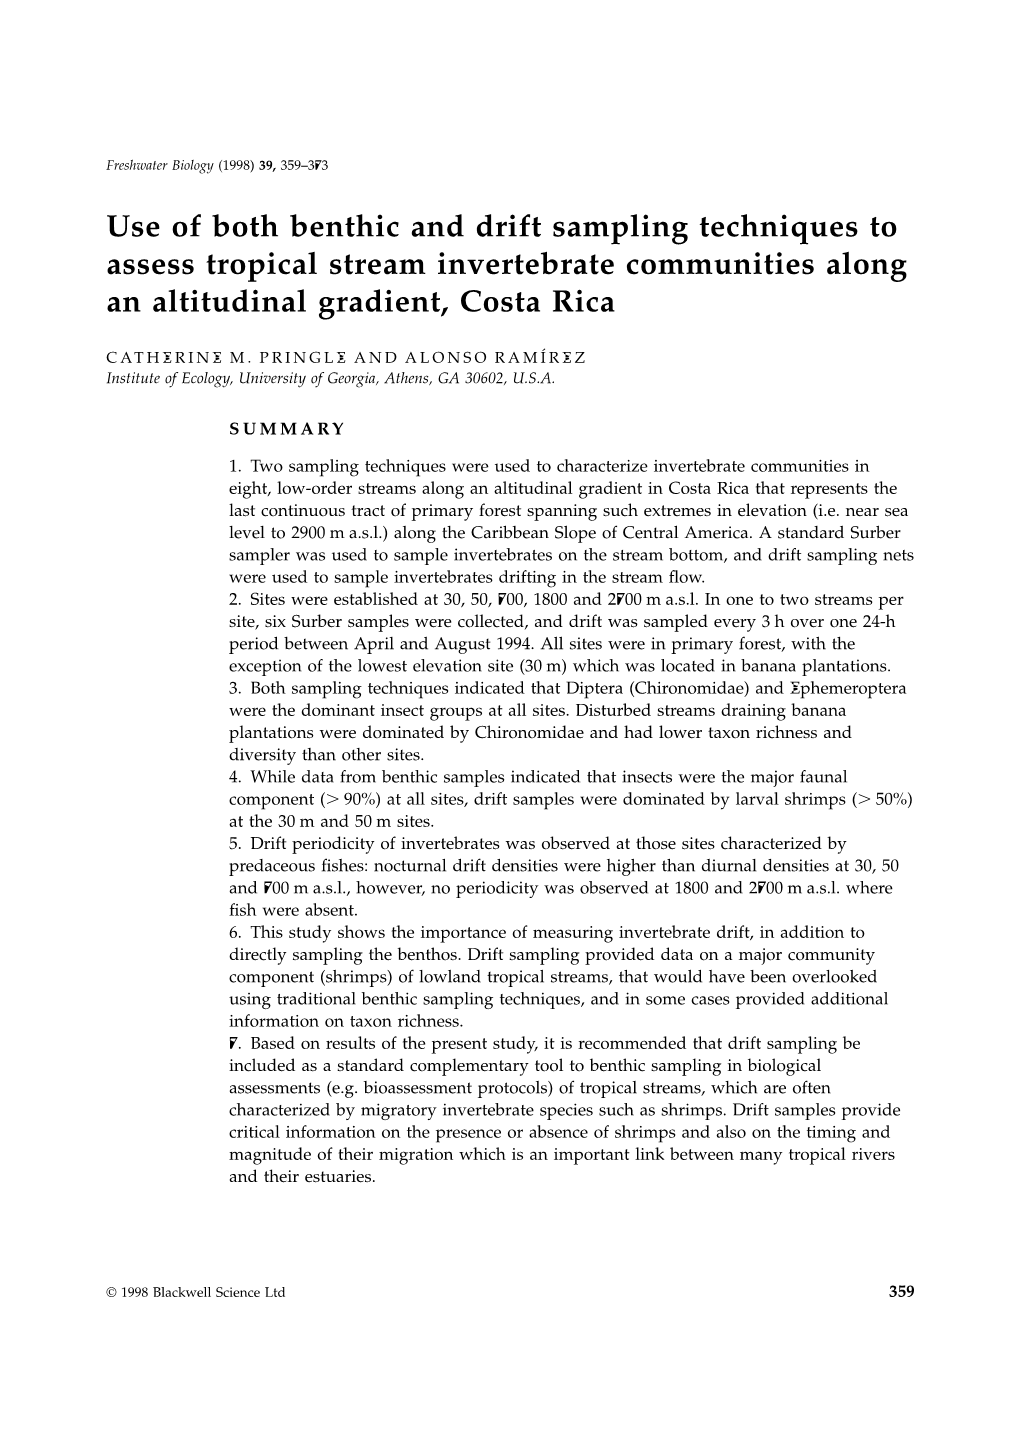 Use of Both Benthic and Drift Sampling Techniques to Assess Tropical Stream Invertebrate Communities Along an Altitudinal Gradient, Costa Rica